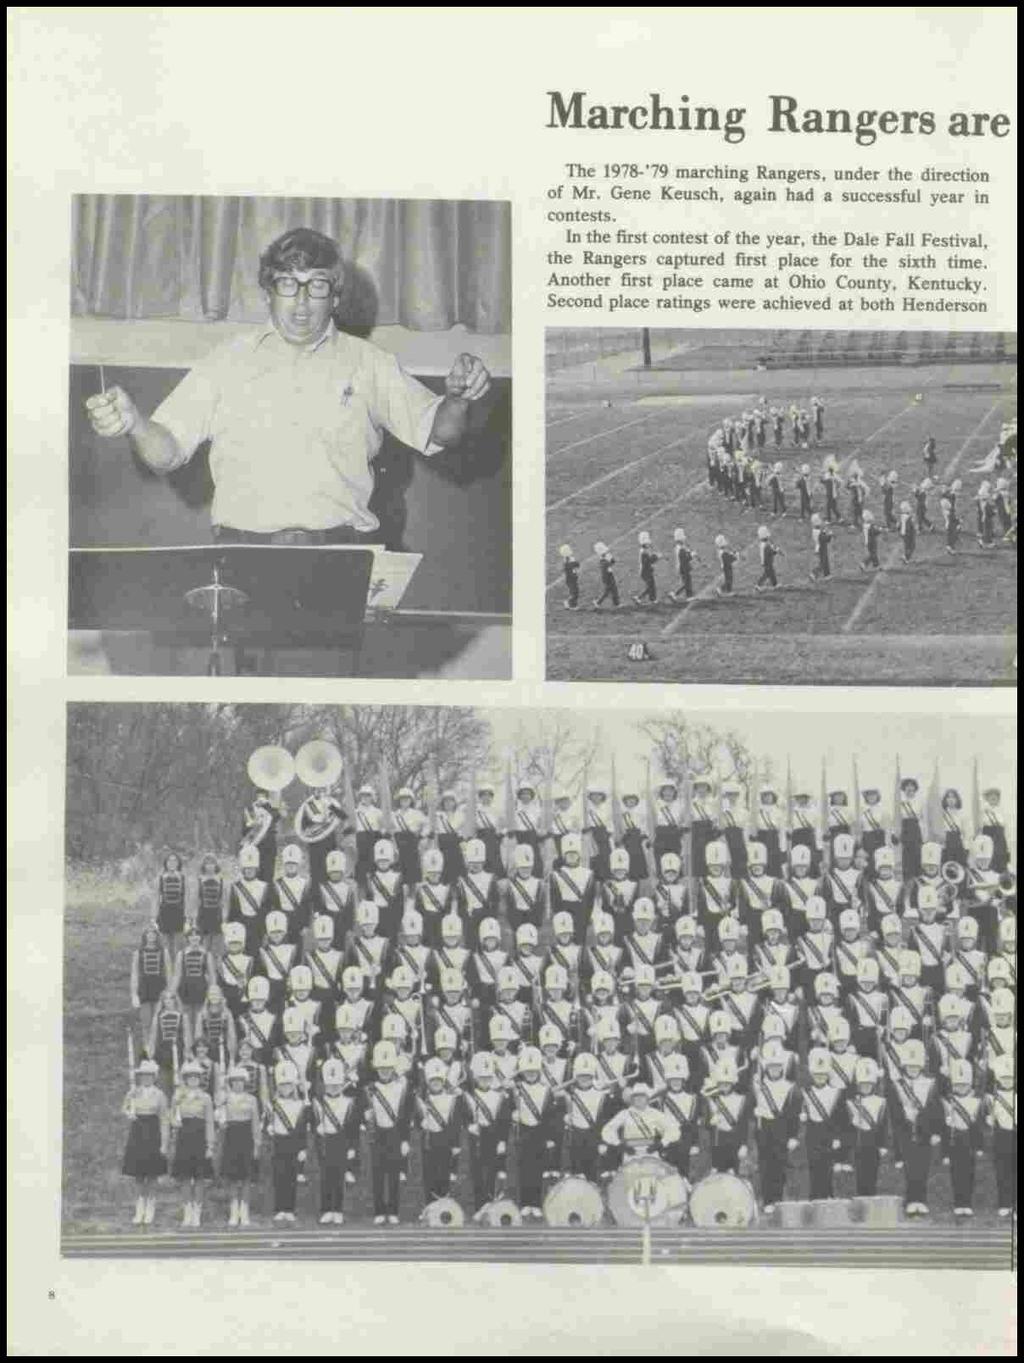 Marching Rangers are The 1978-'79 marching Rangers, under the direction of Mr. Gene Keusch, again had a successful year in contests.